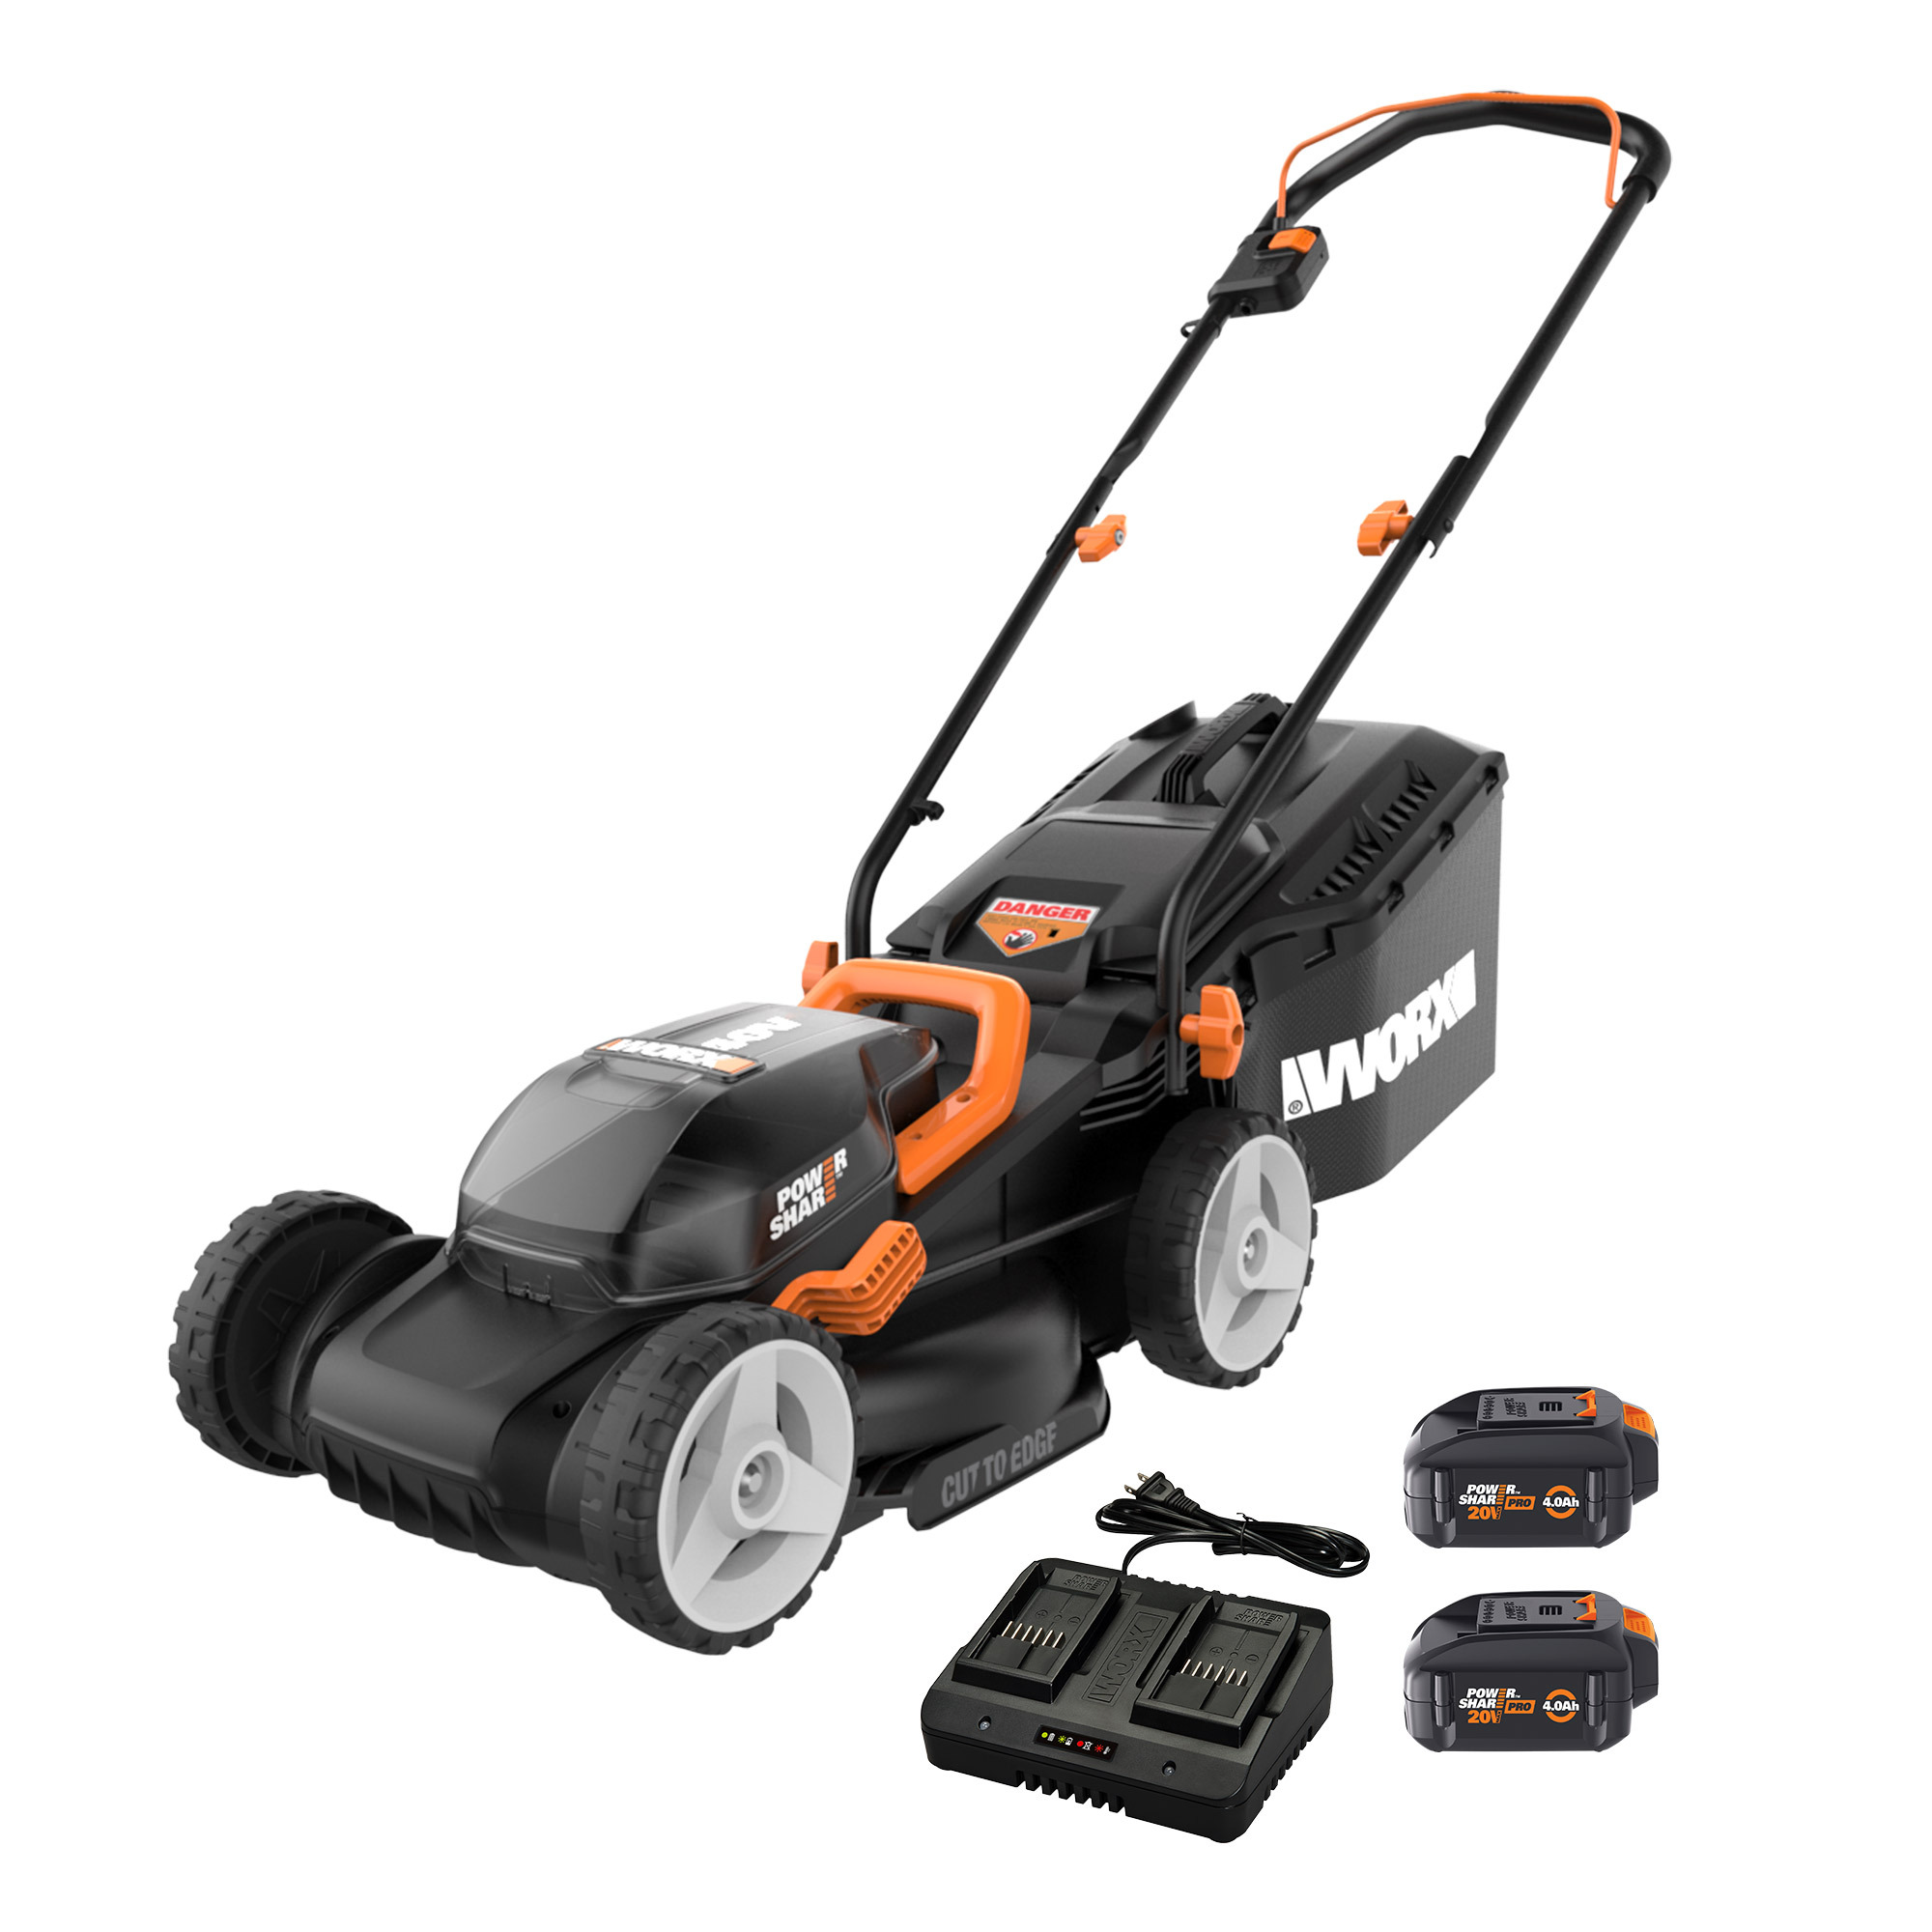 Worx WG779 40V Power Share 4.0Ah 14" Cordless Lawn Mower (Battery and Charger Included) - image 1 of 10